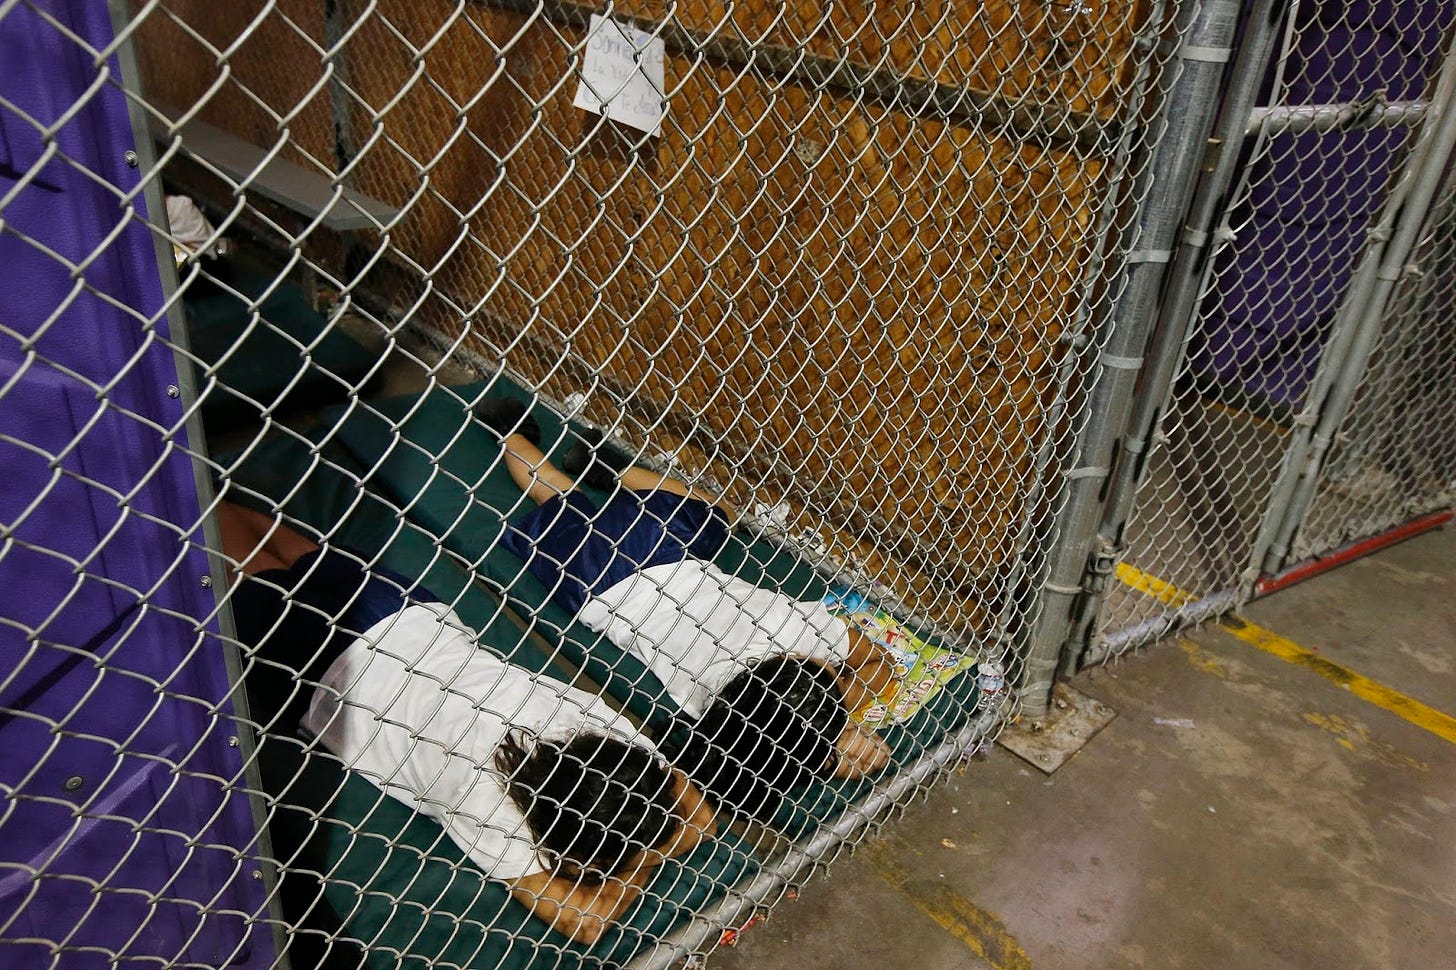 Treated Worse than Dogs': Immigrant Kids in Detention Give Firsthand  Accounts of Squalid Conditions